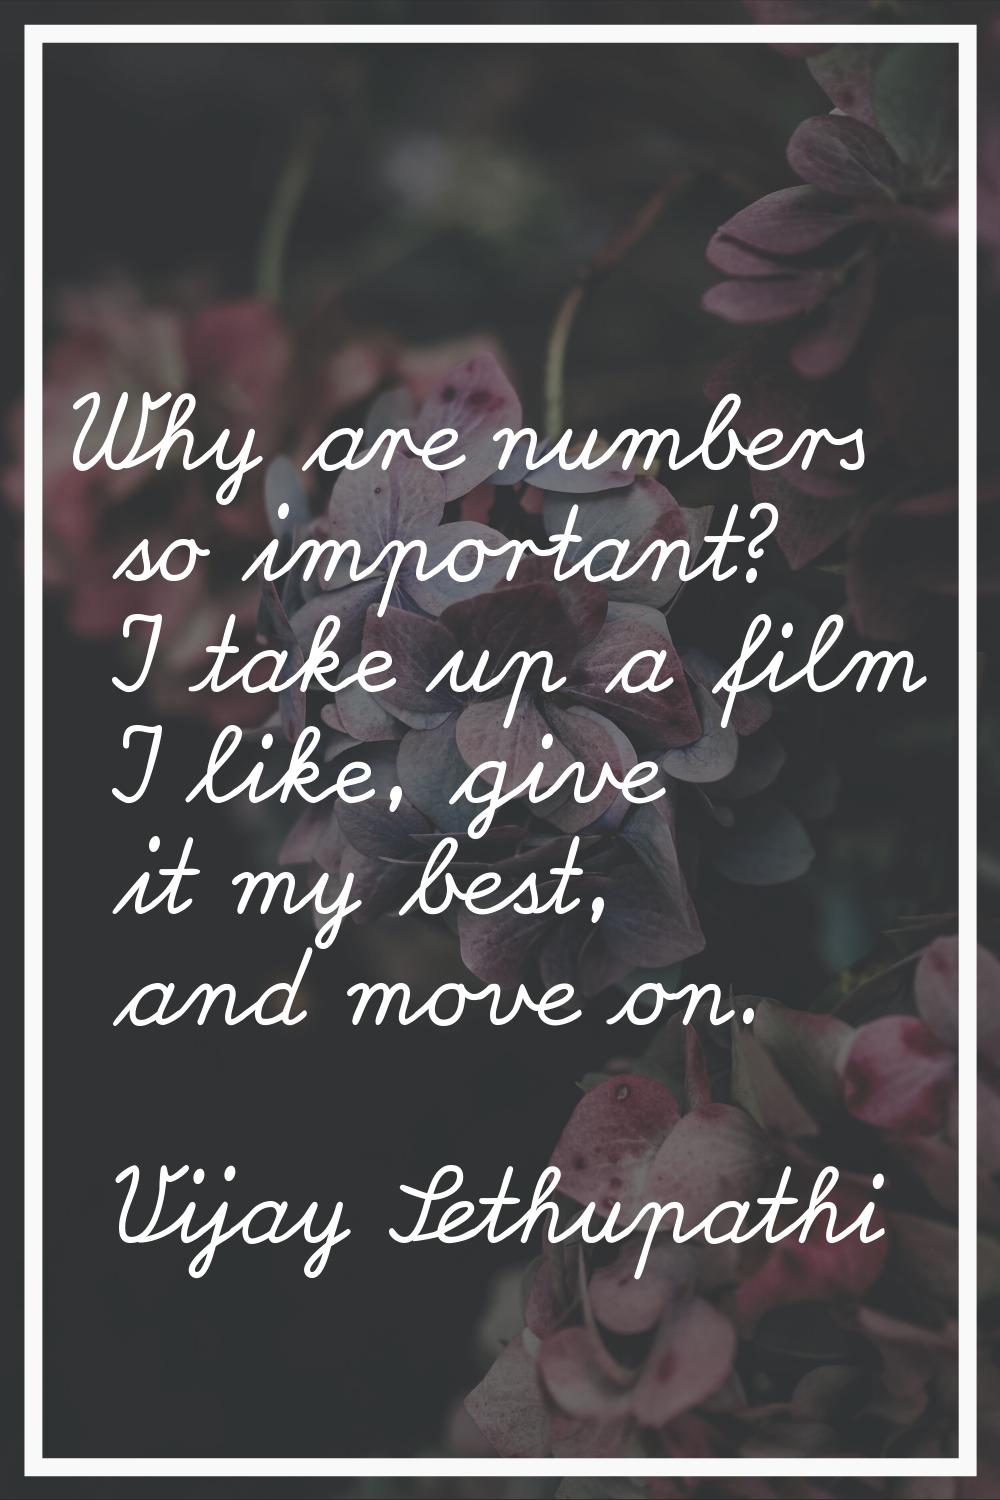 Why are numbers so important? I take up a film I like, give it my best, and move on.